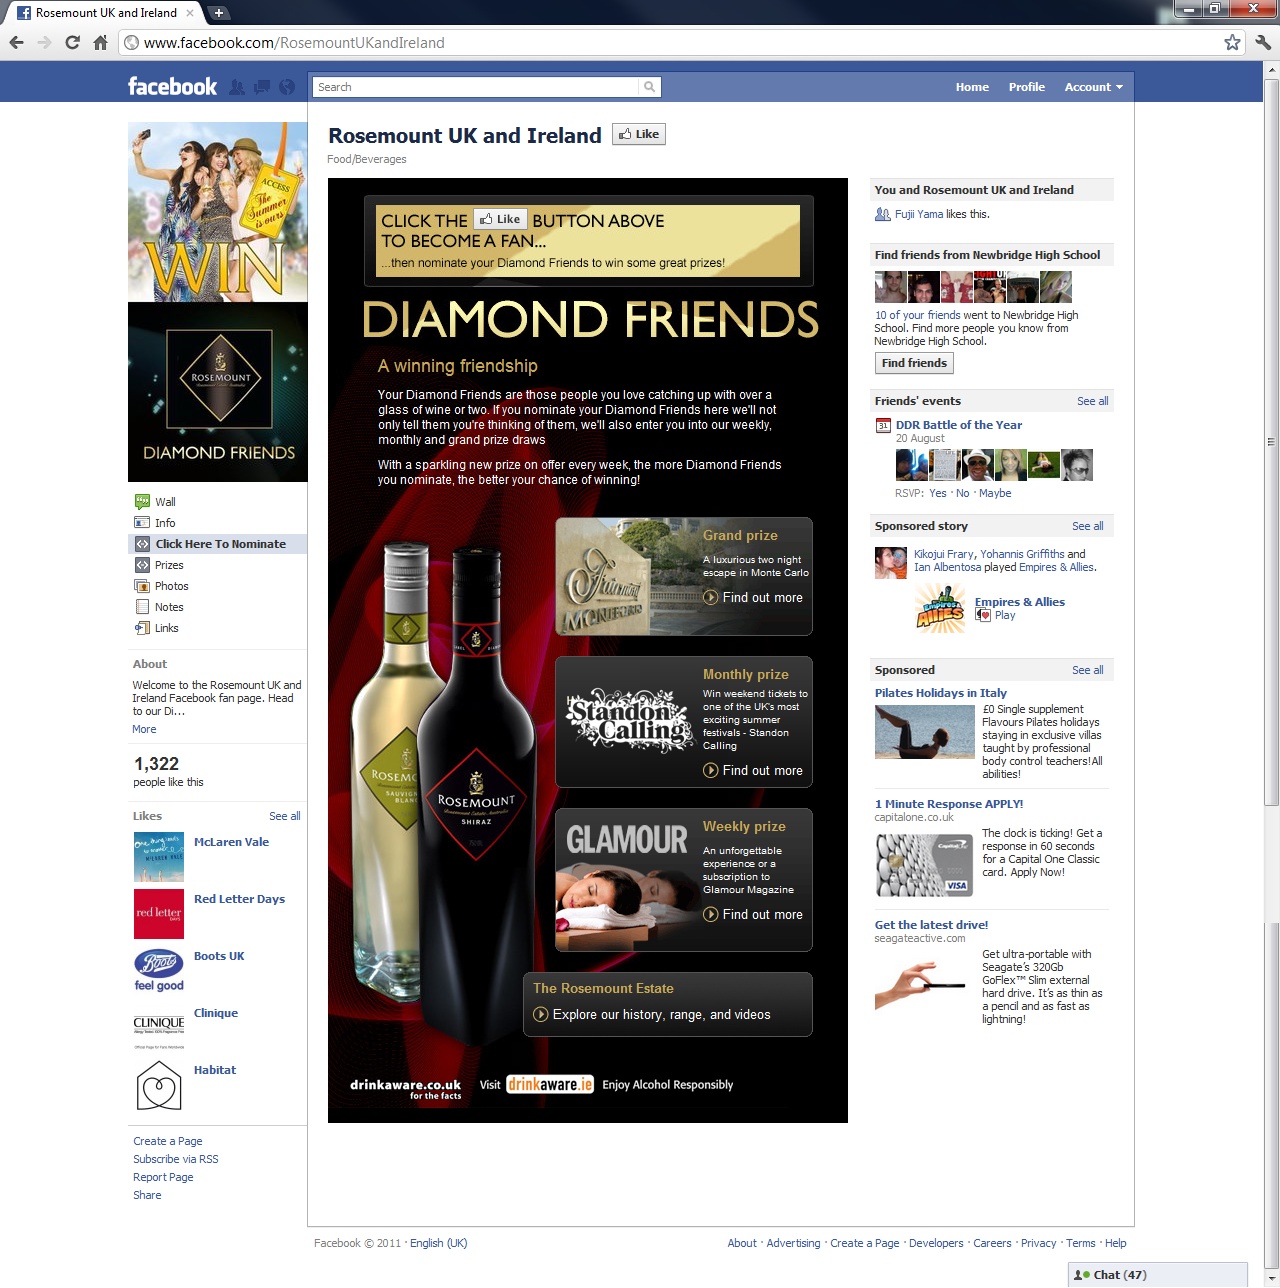 The landing page for the RosemountUK invite a friend Facebook application